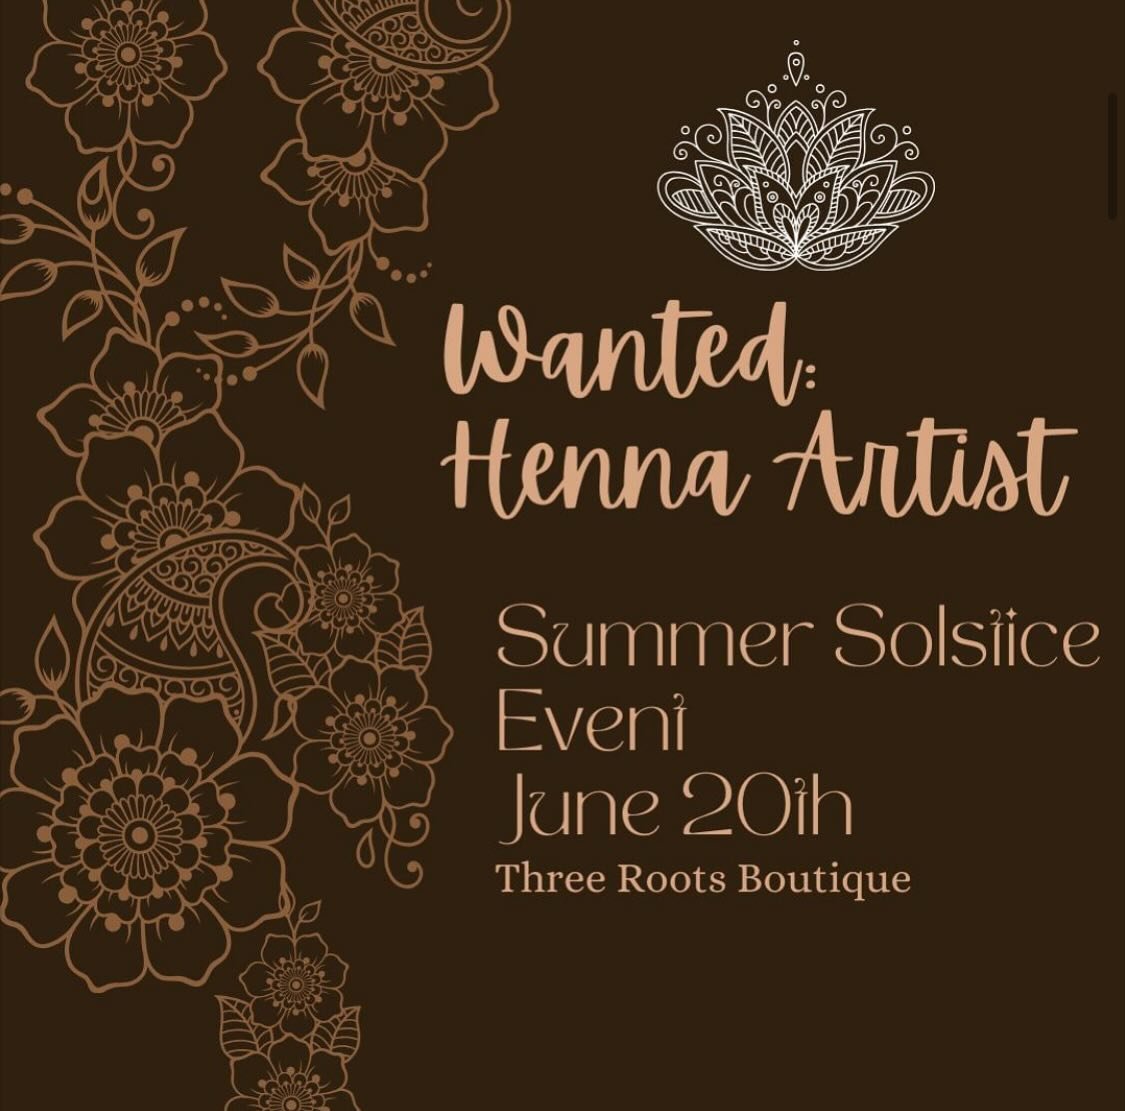 Save the Date! We are in the planning stages for our Summer Solstice Event I would love to have a henna artist on tap for our customers on June 20th. We will have yoga and our next Sound Bath &amp; Tea event on this day. Watch for more details. 

Con